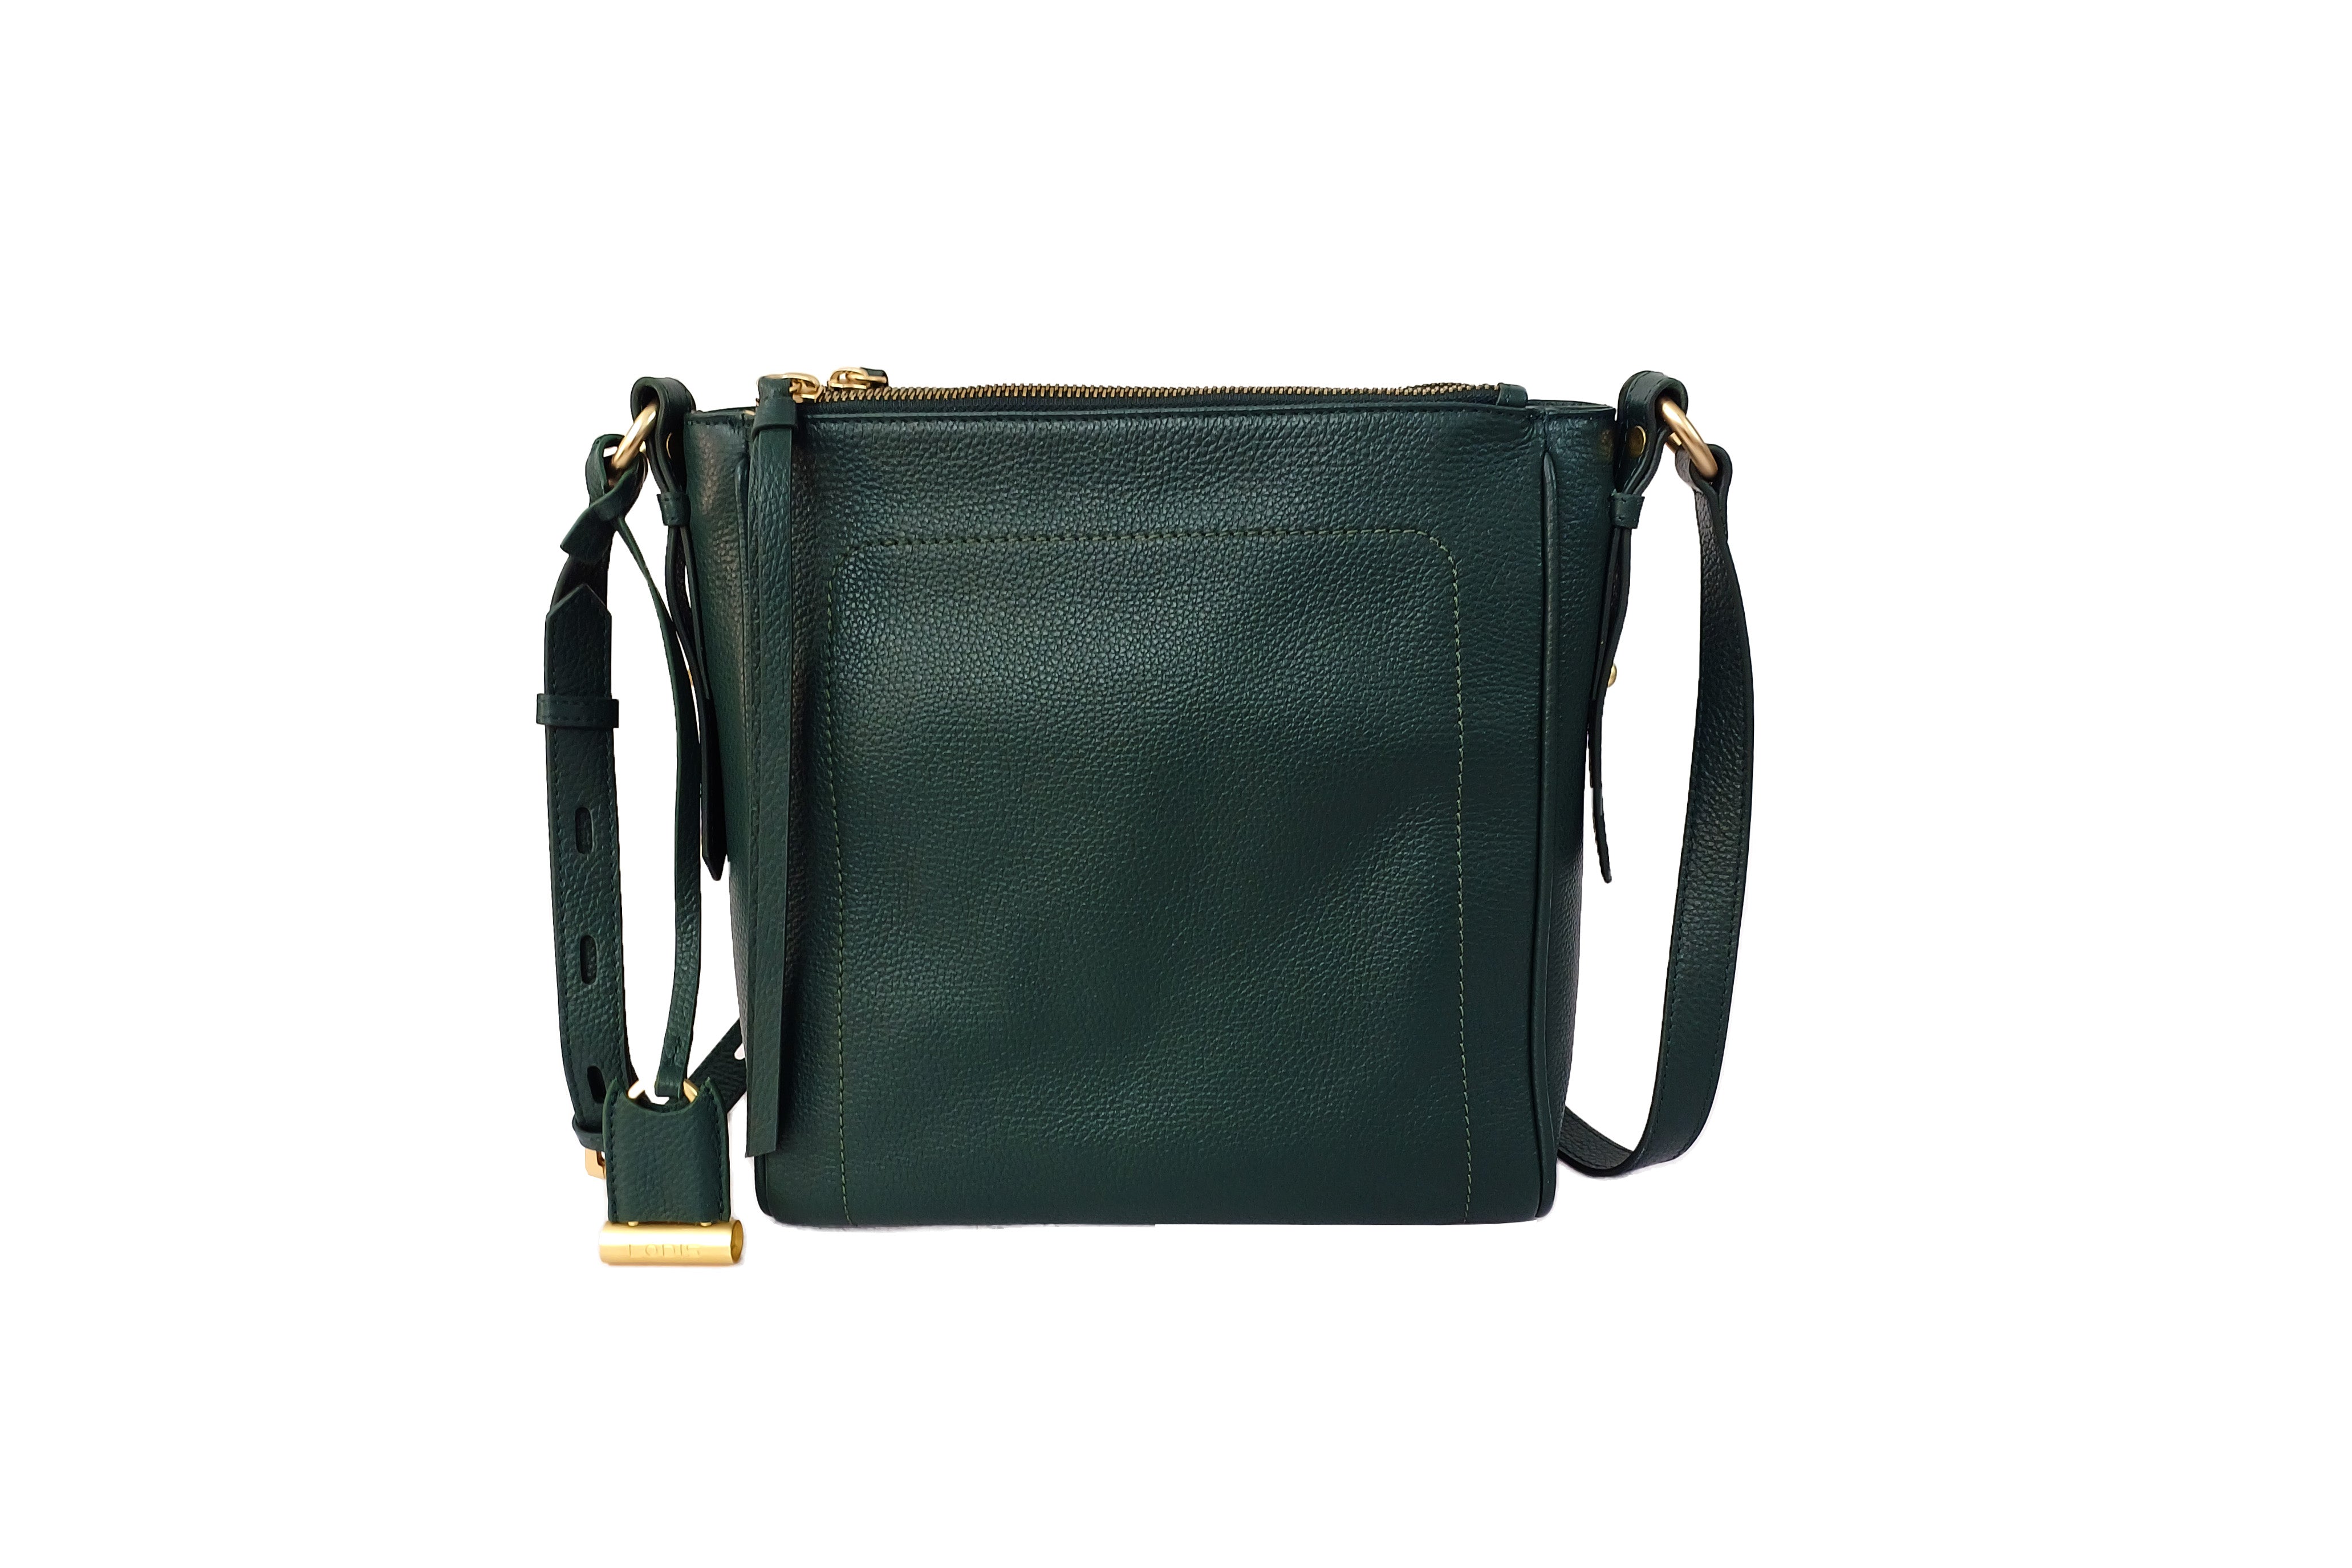 Get the Evelyn Leather Crossbody At The  Ultimate prices | Lodis